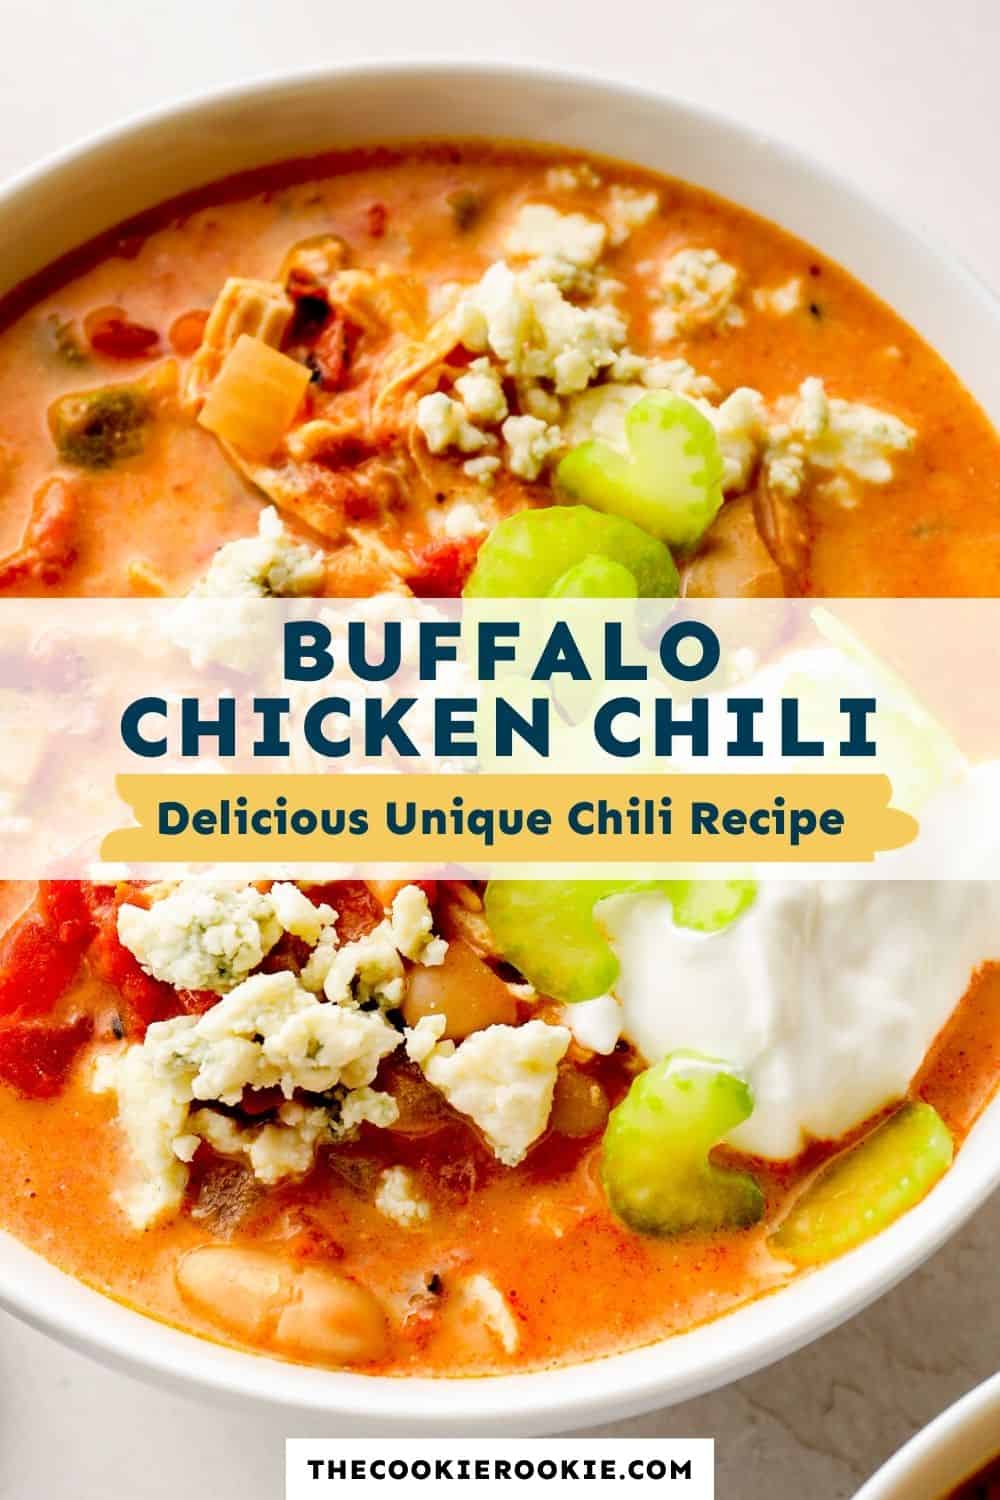 Buffalo Chicken Chili Recipe - The Cookie Rookie®